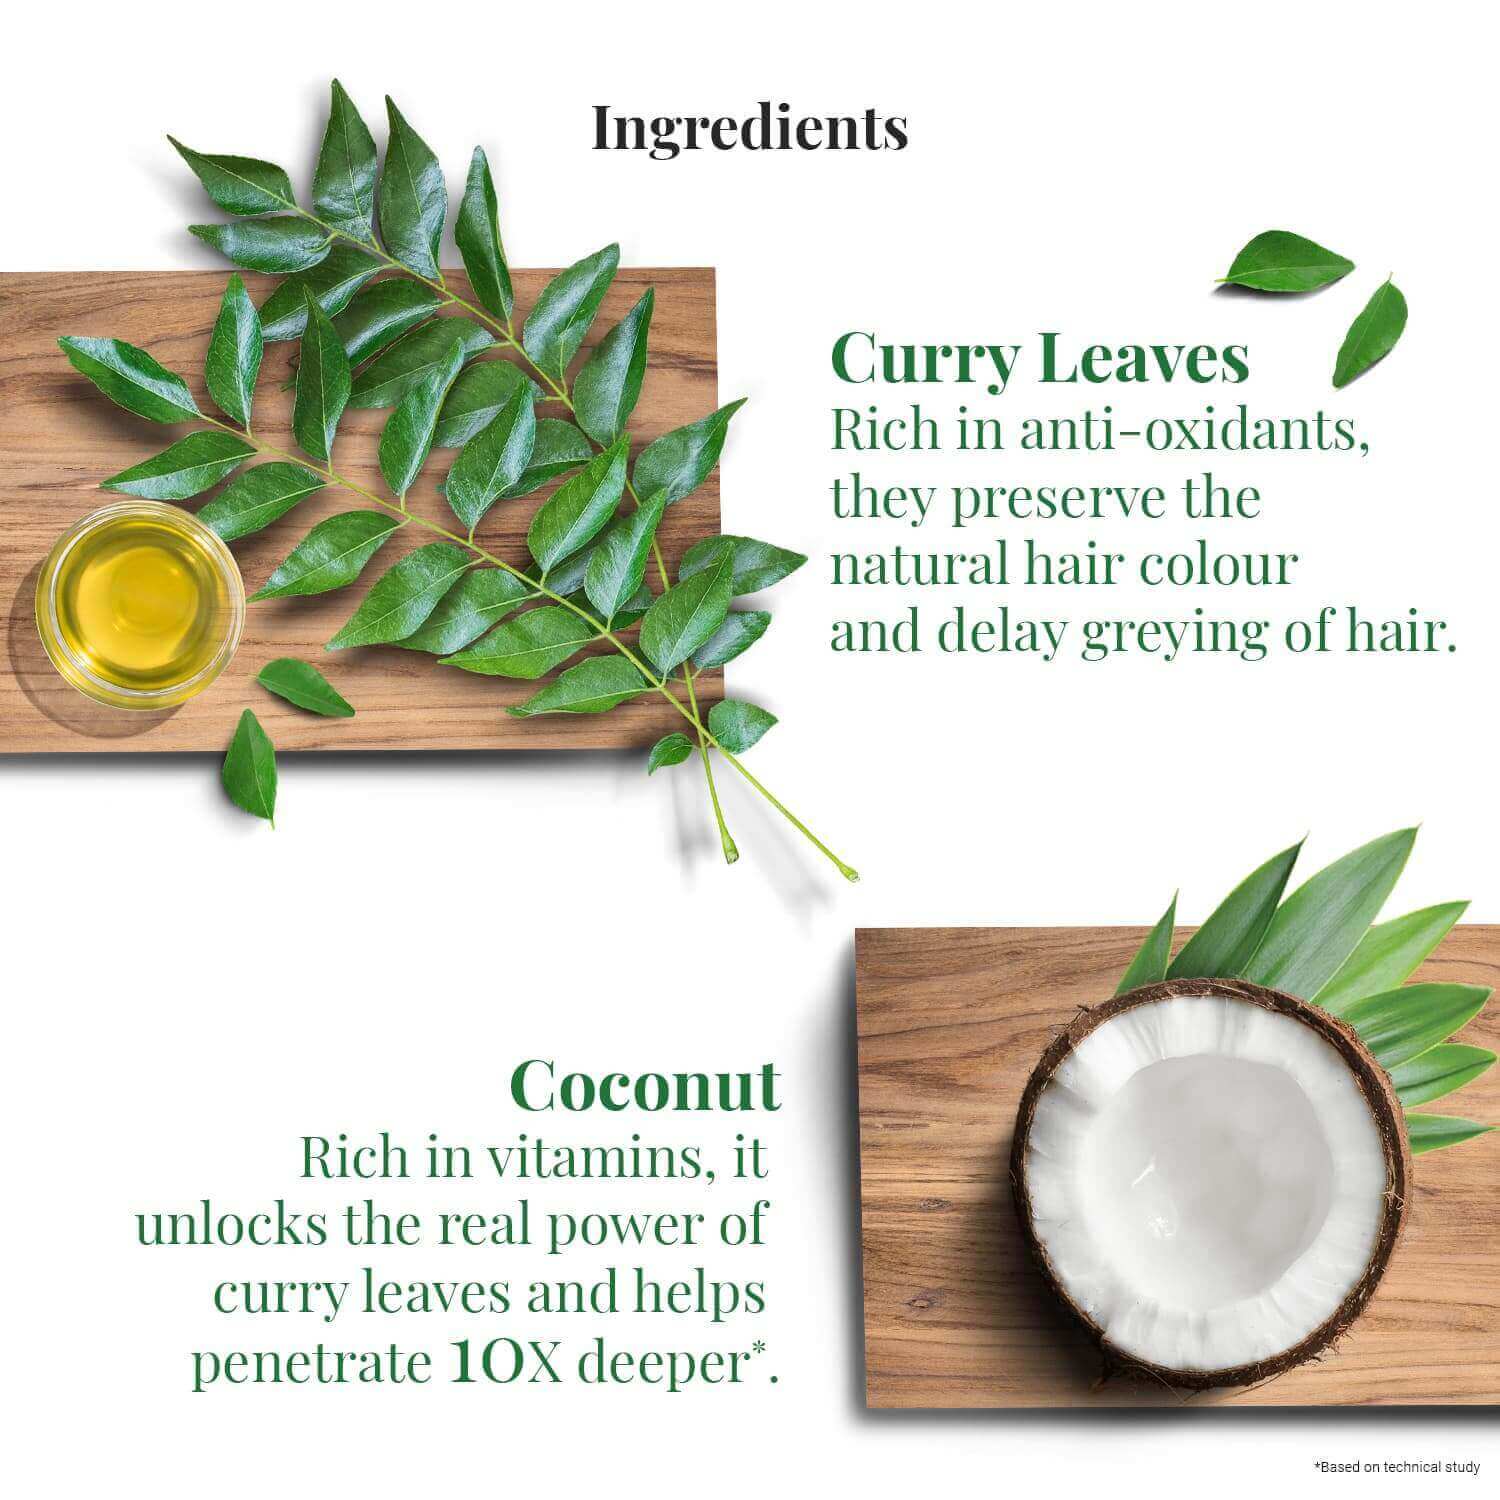 Buy The Parachute Advansed Curry Leaves And Coconut Hair Oil Now!